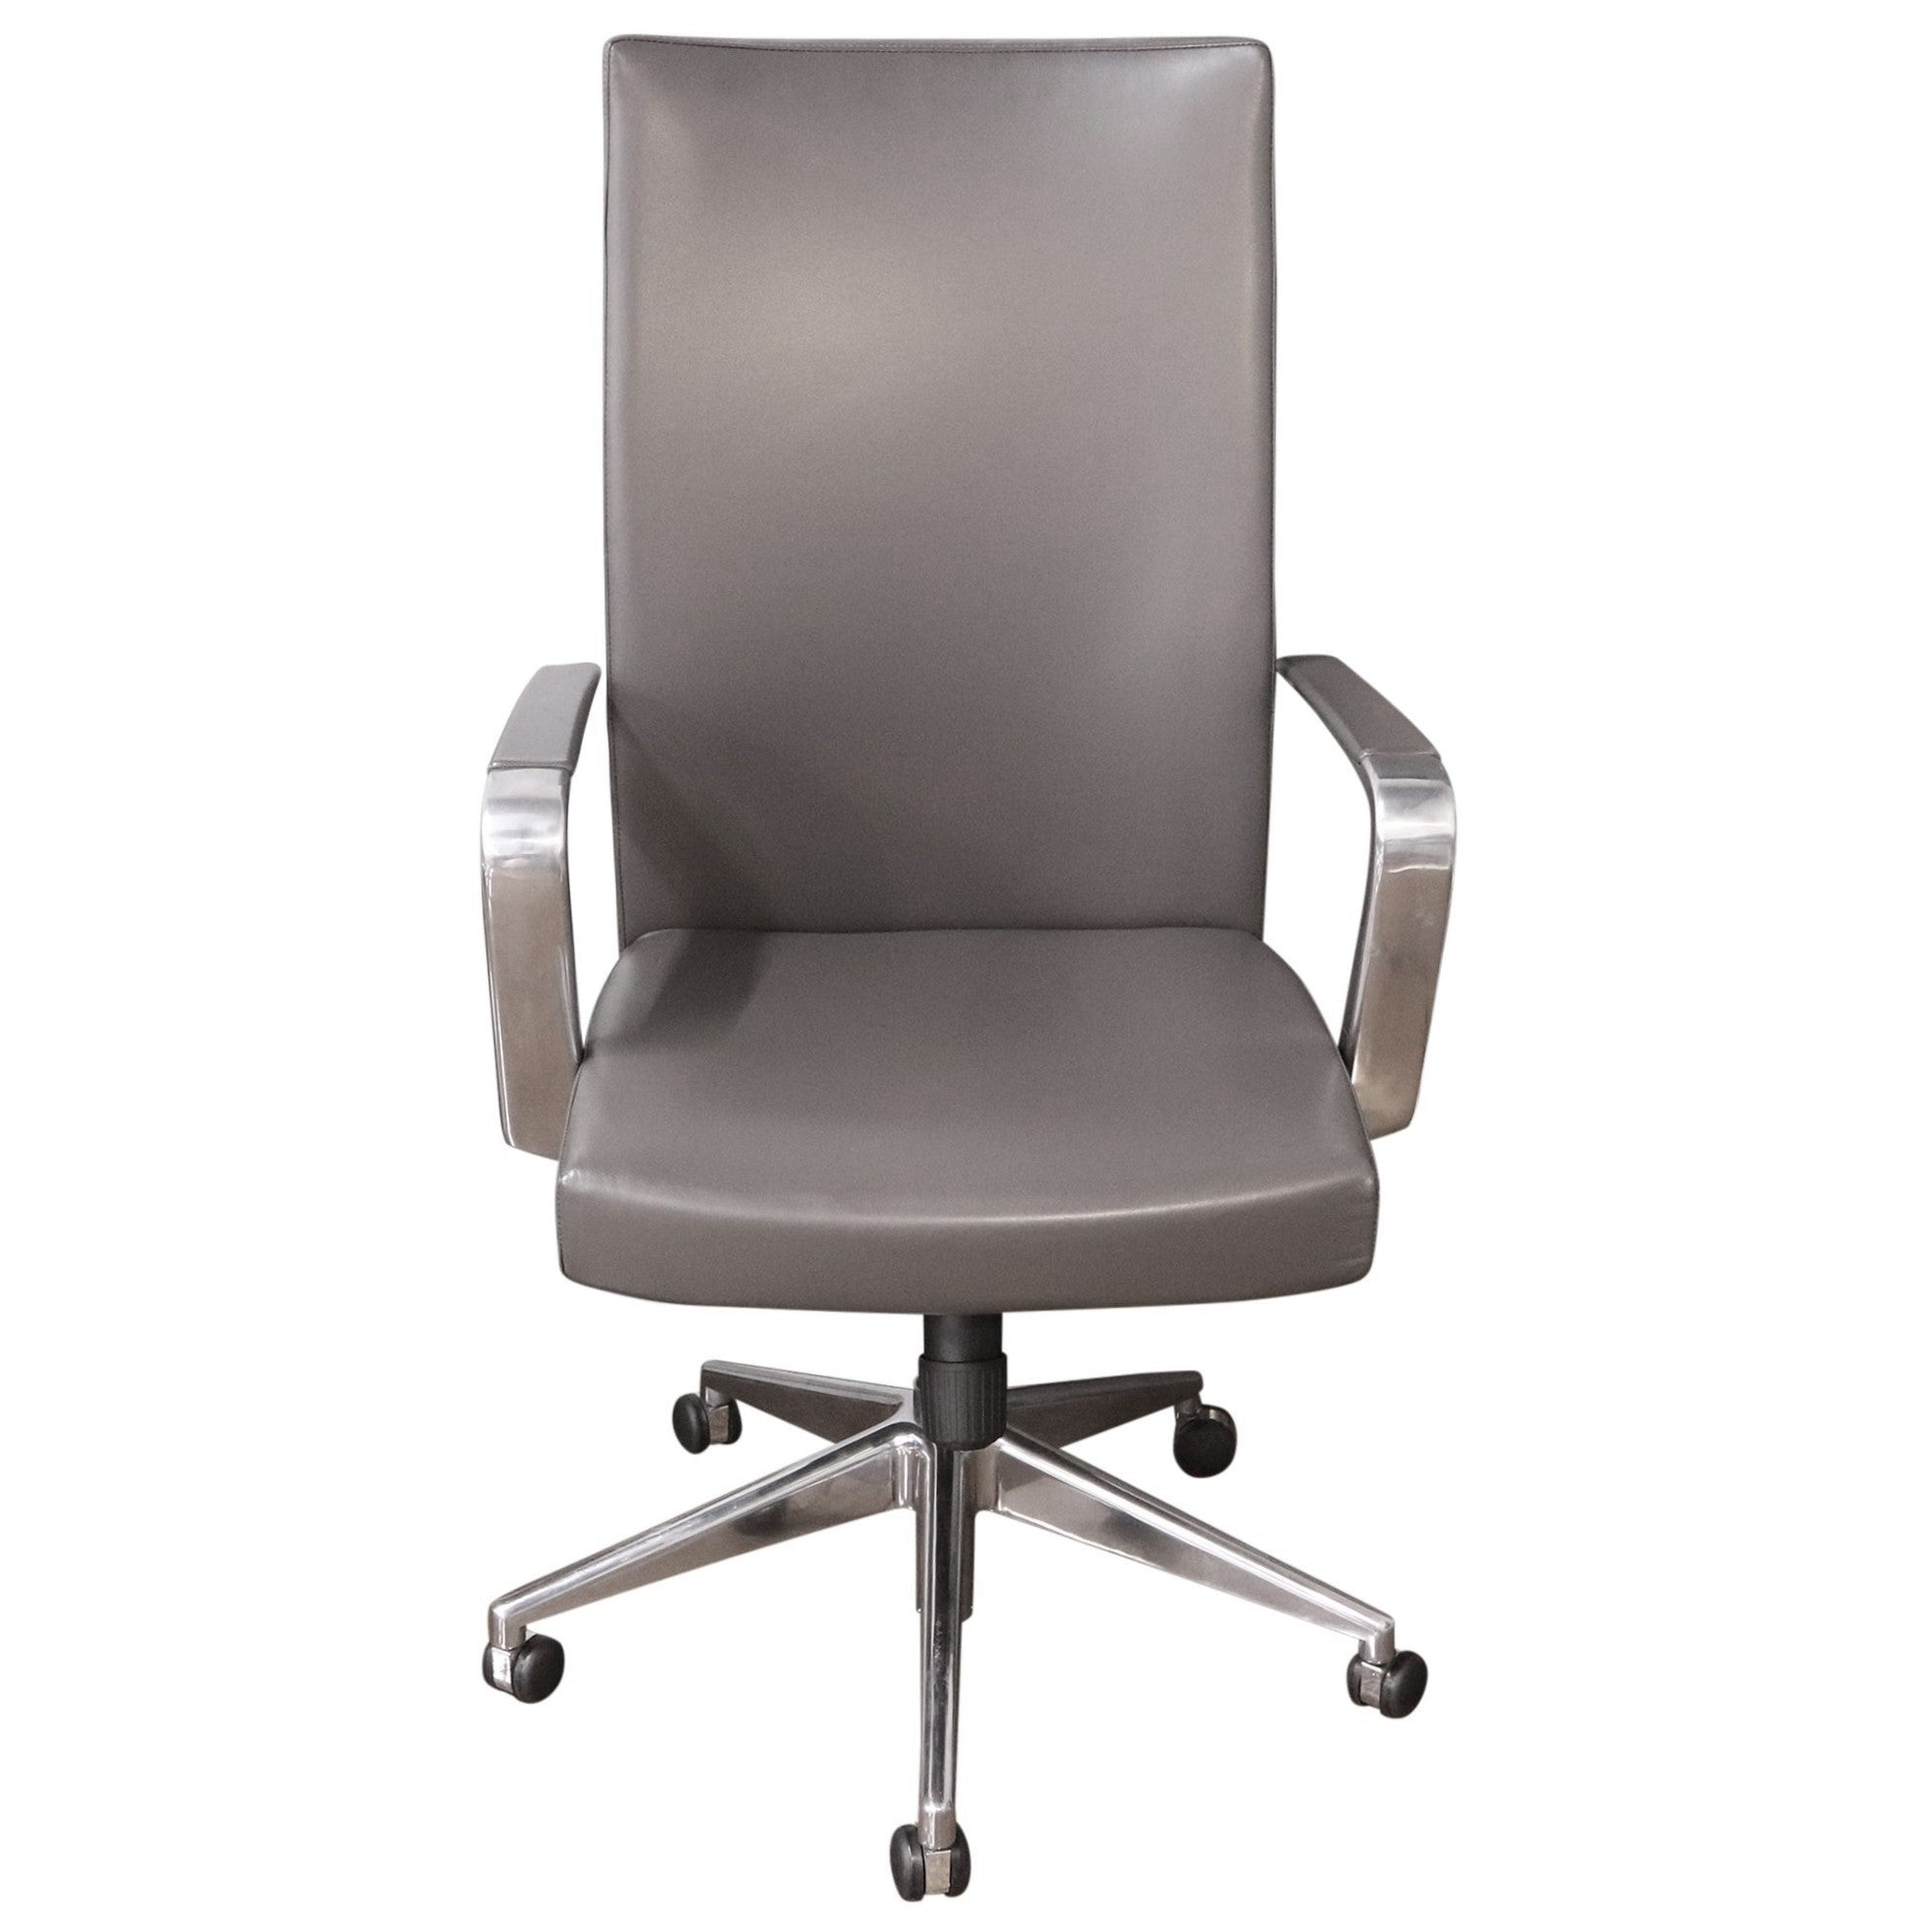 HBF Cadre High Back Swivel Tilt Conference Chair, Slate Grey - Preowned